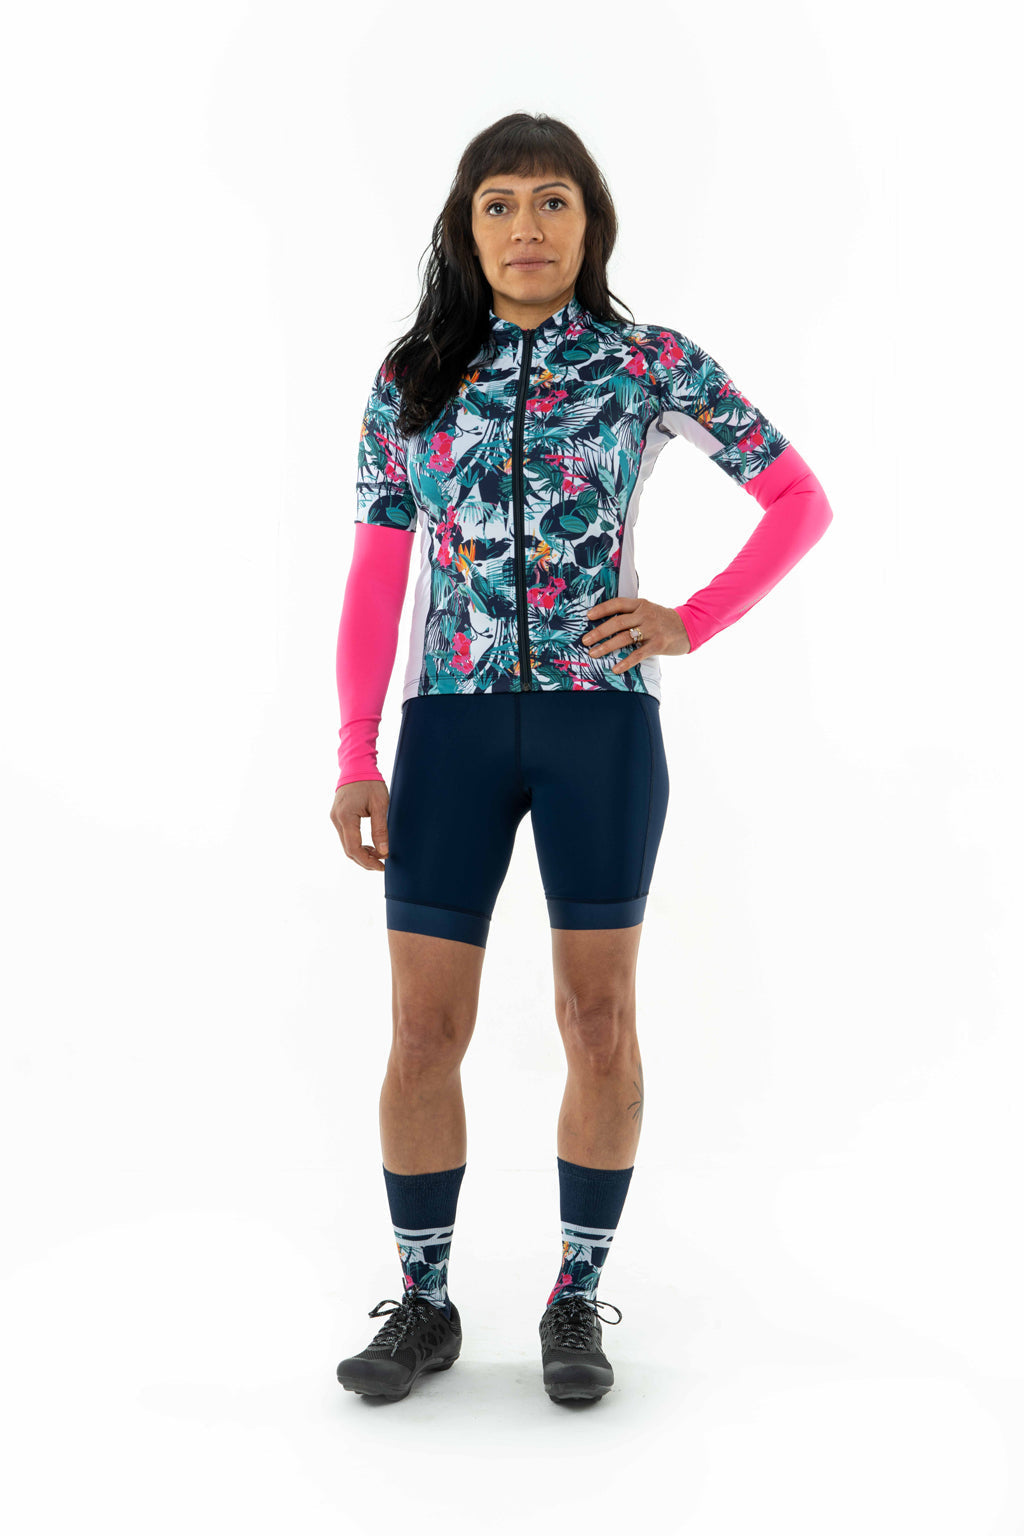 Women's Cycling Jersey - Breathable, Moisture Wicking, Tropical